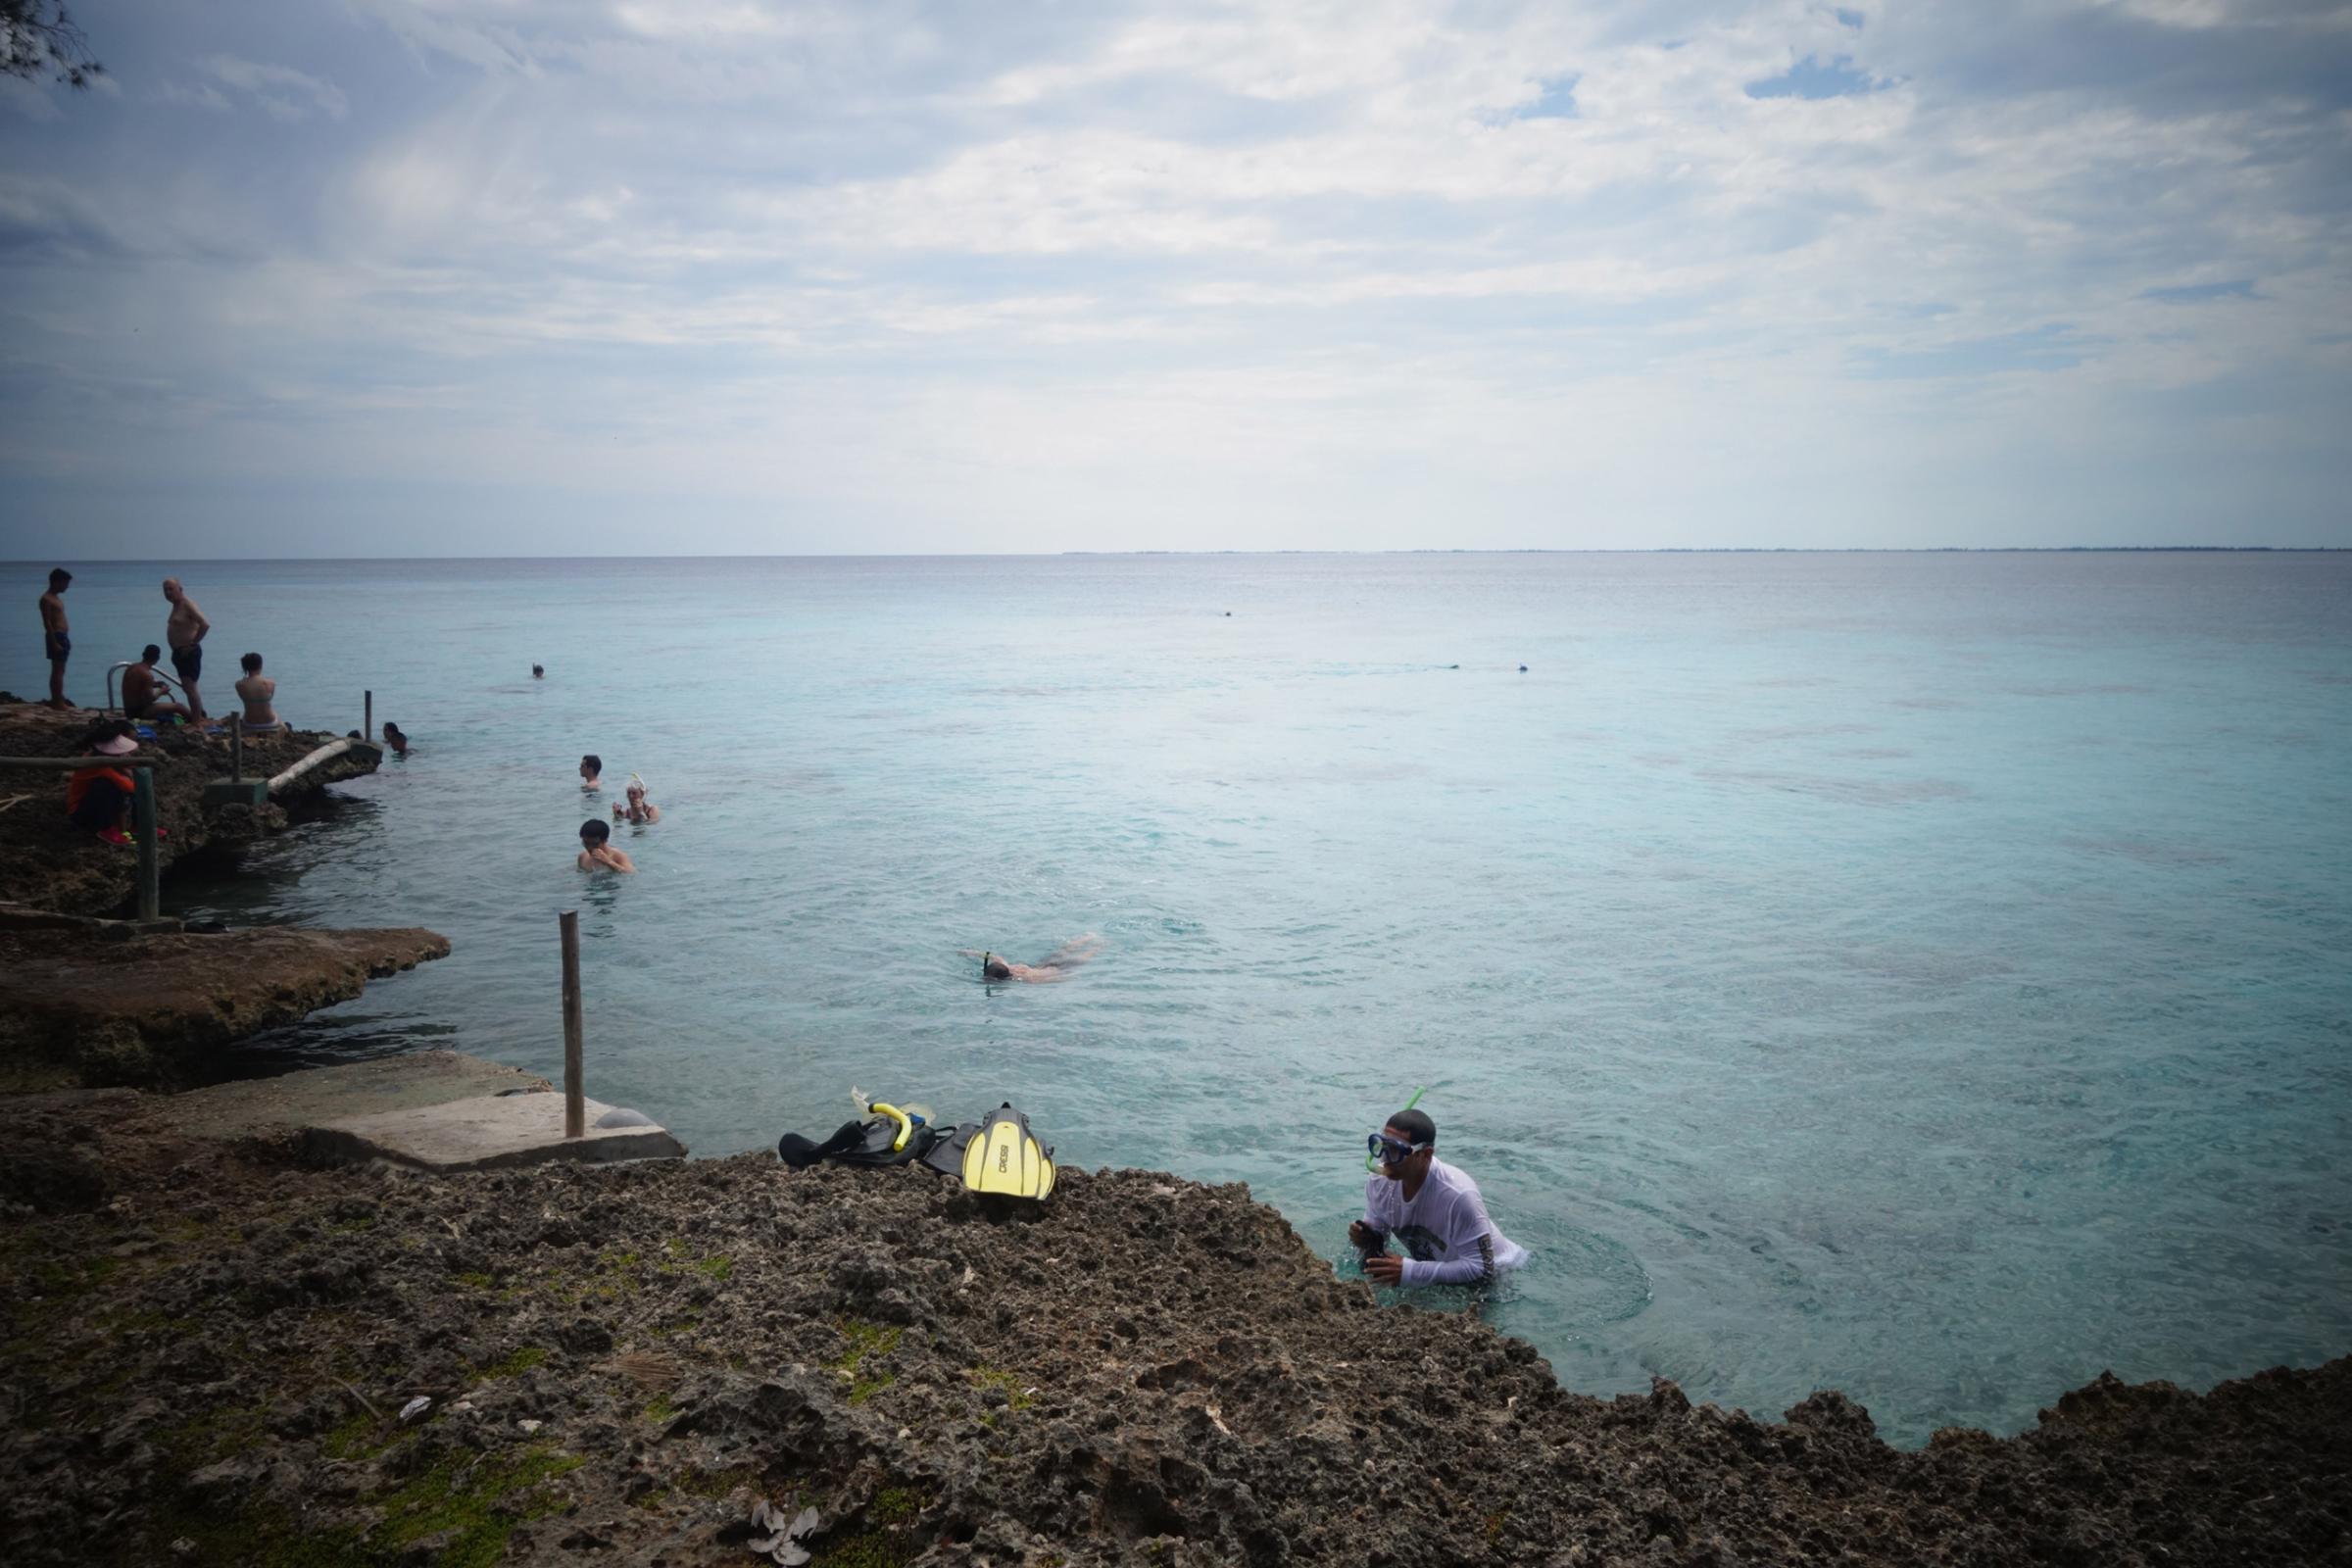 Waters popular for snorkeling in the Bay of Pigs, or Bahia de Cochinos, Cuba, May 2, 2015.